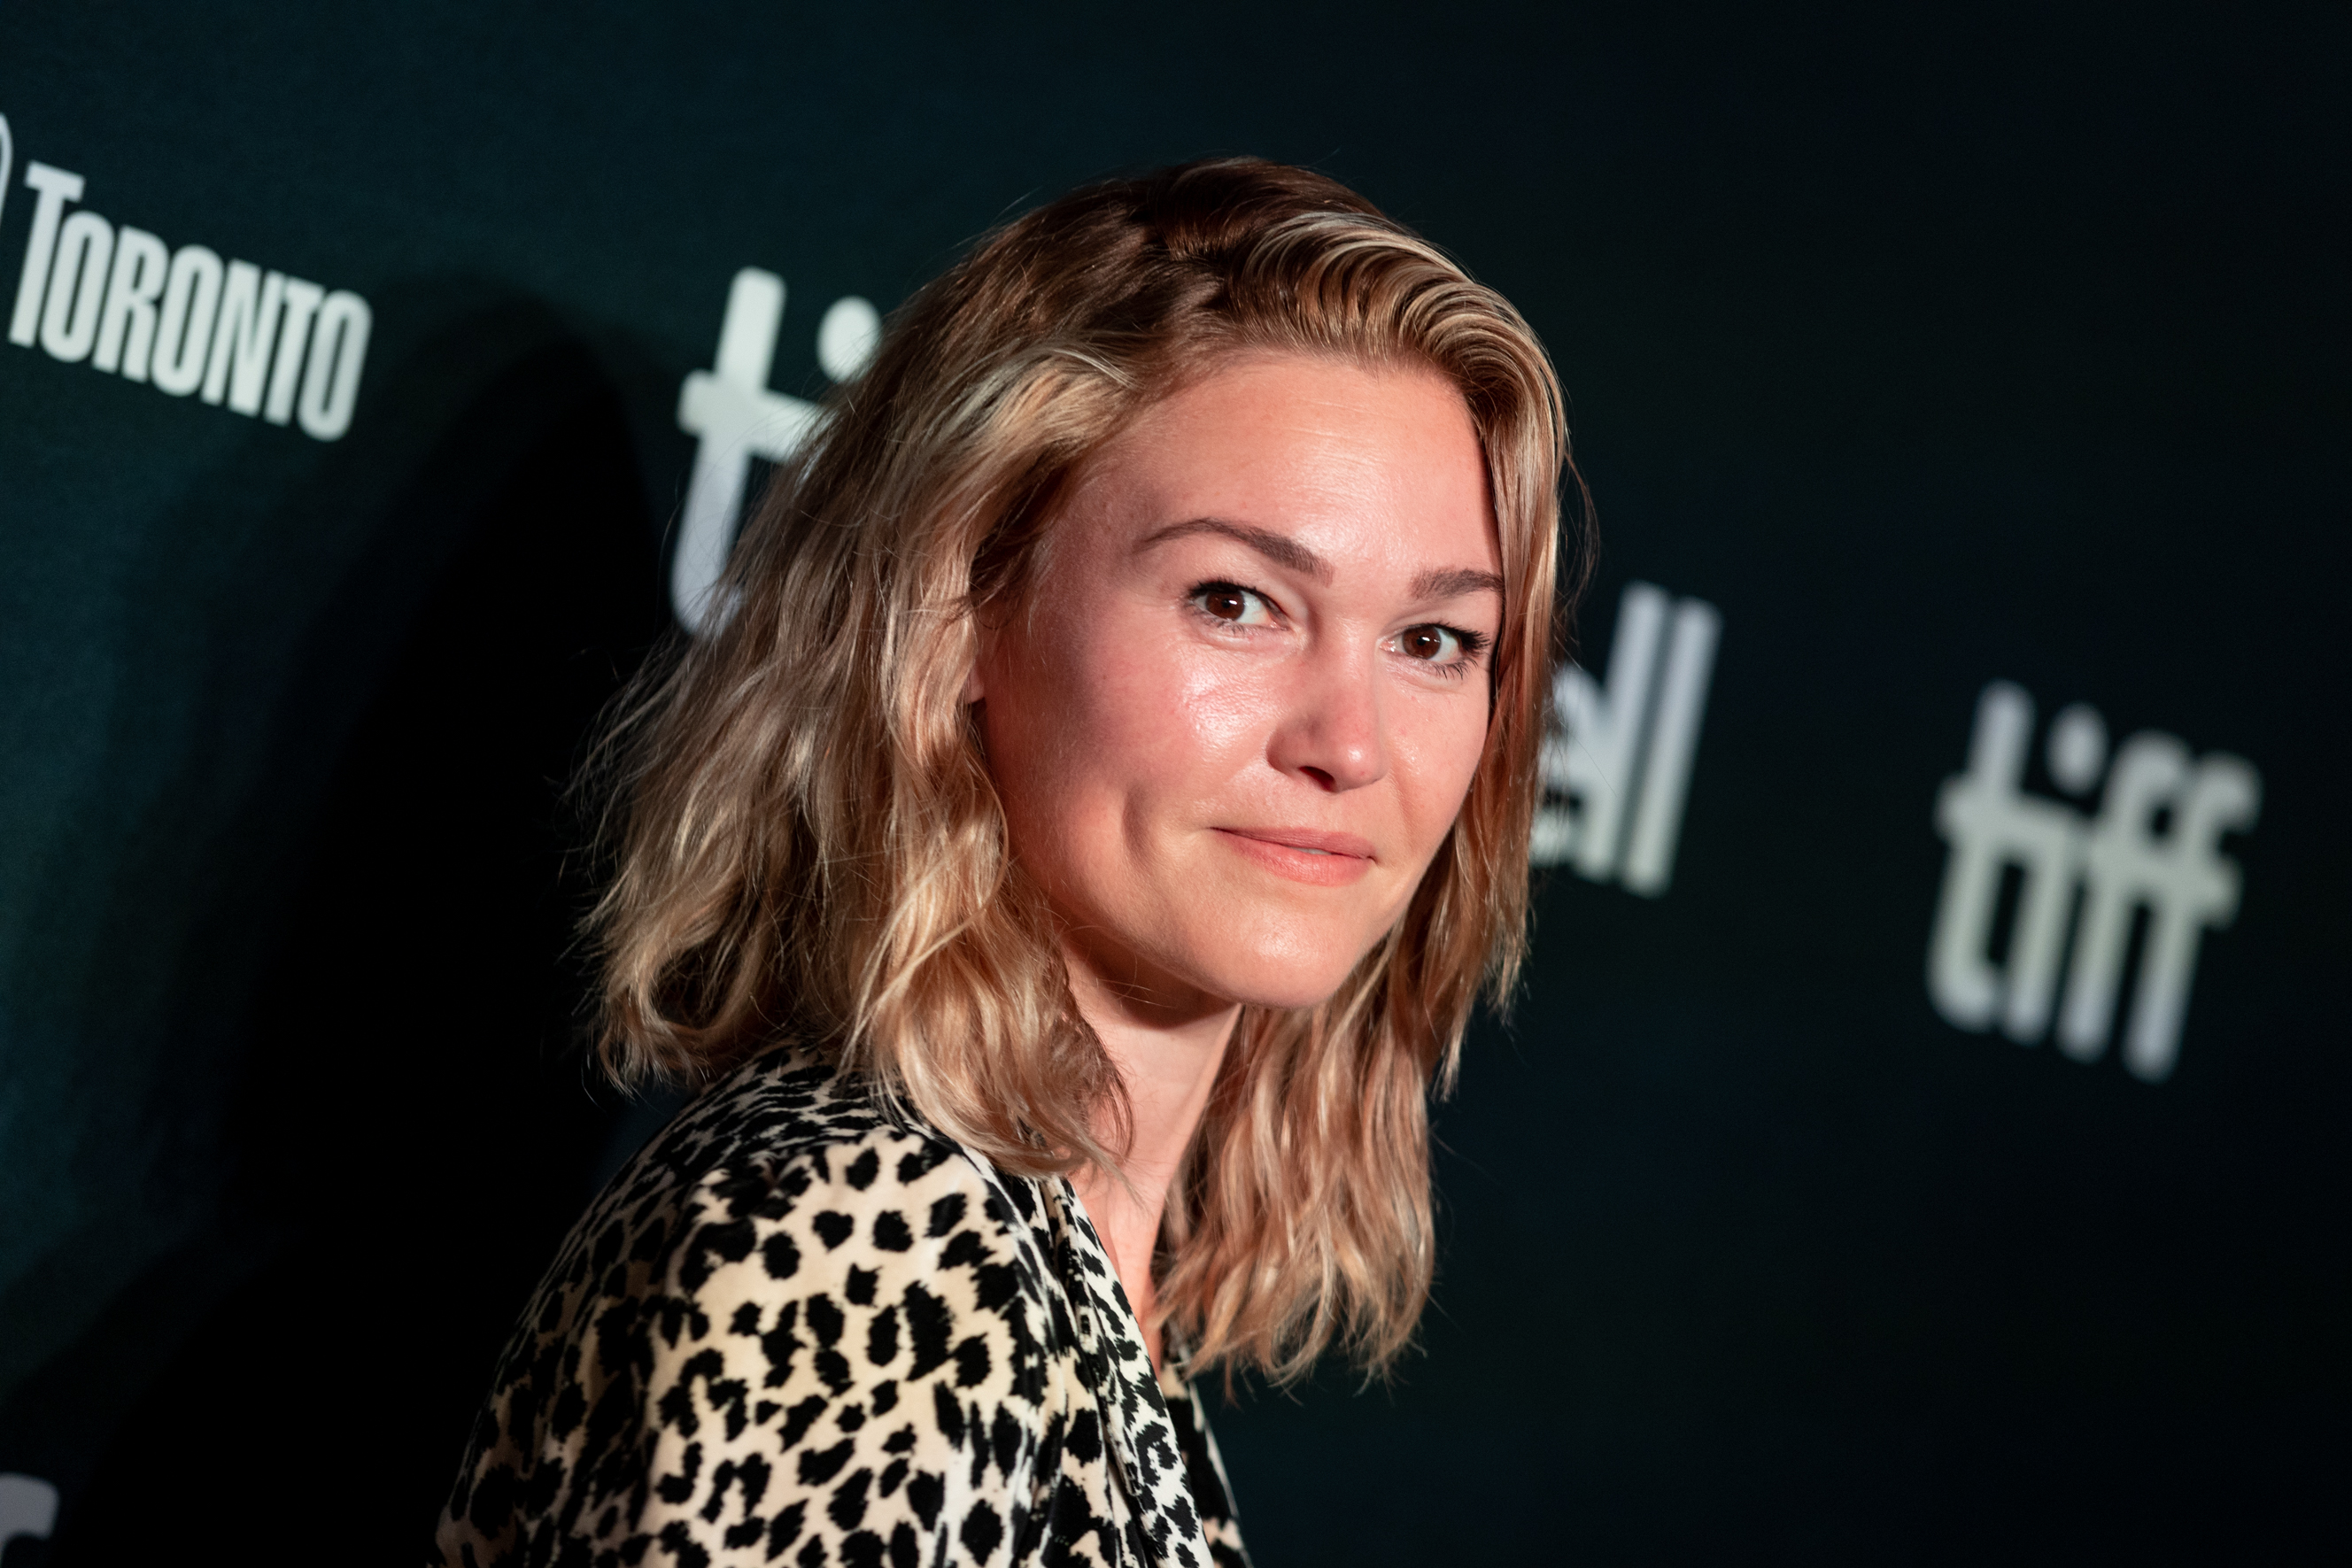 Julia Stiles attends the 2022 Toronto International Film Festival premiere of "Butcher's Crossing," at Roy Thomson Hall on September 9, 2022, in Toronto, Ontario. | Source: Getty Images